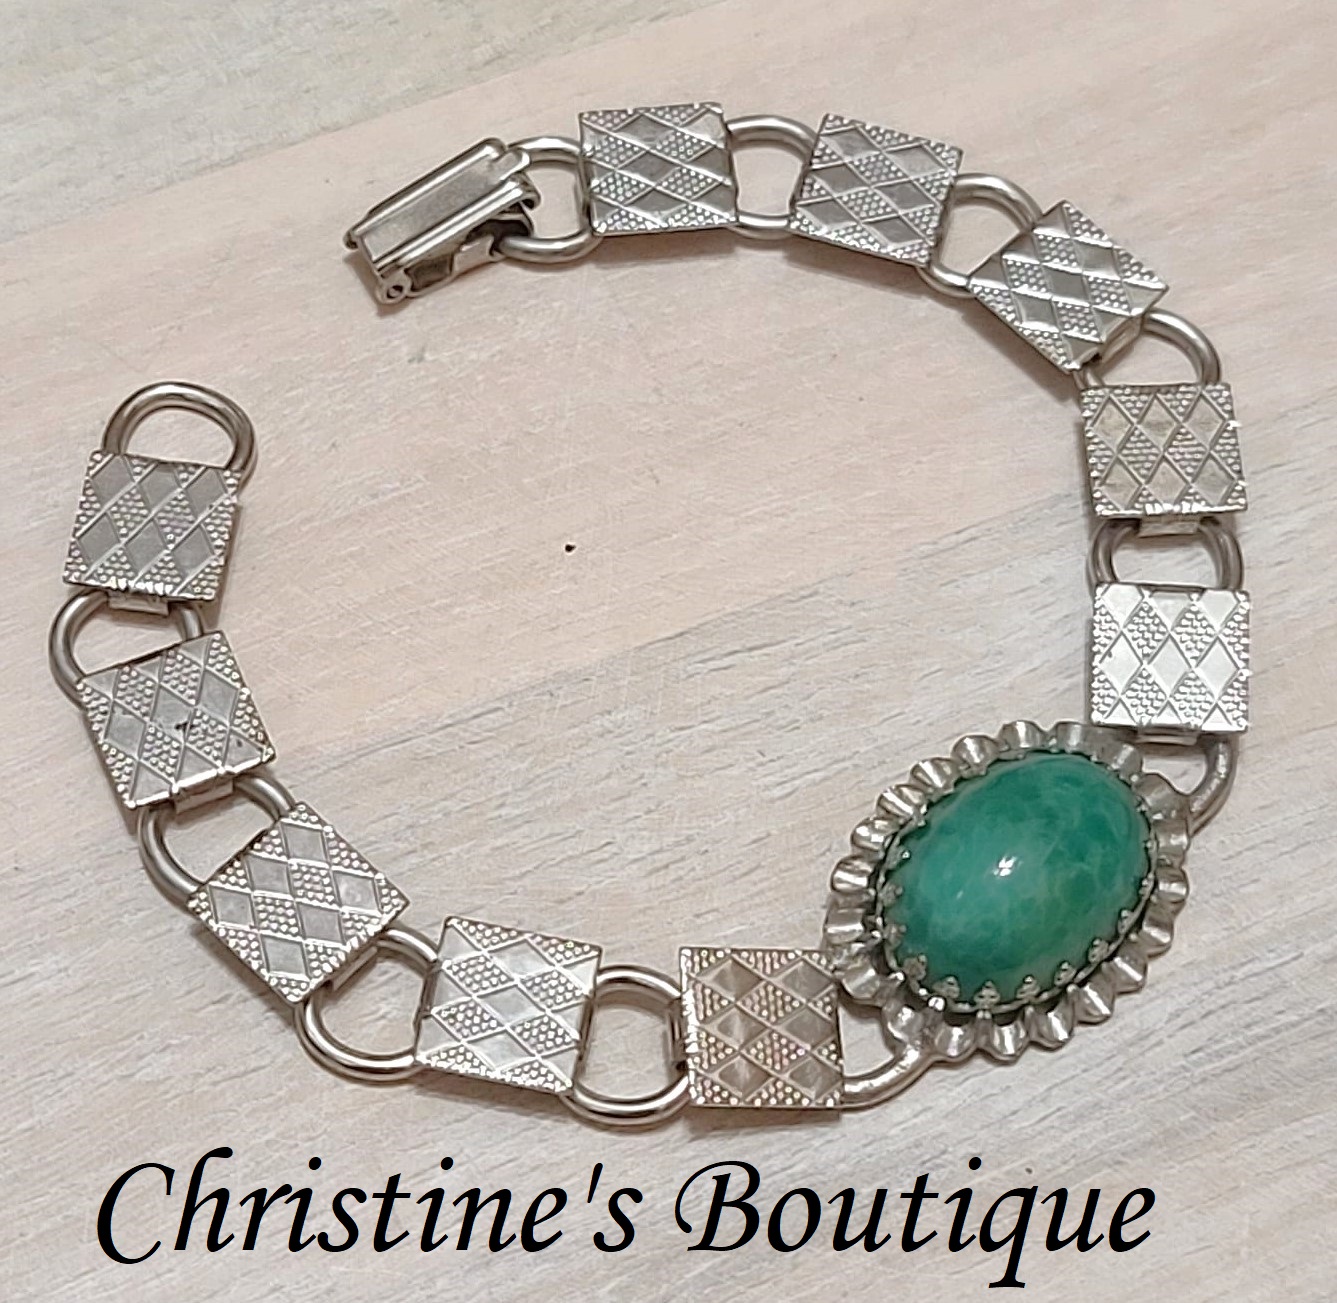 Vintage bracelet, green cabachon center, silvertone with etched detail on band - Click Image to Close